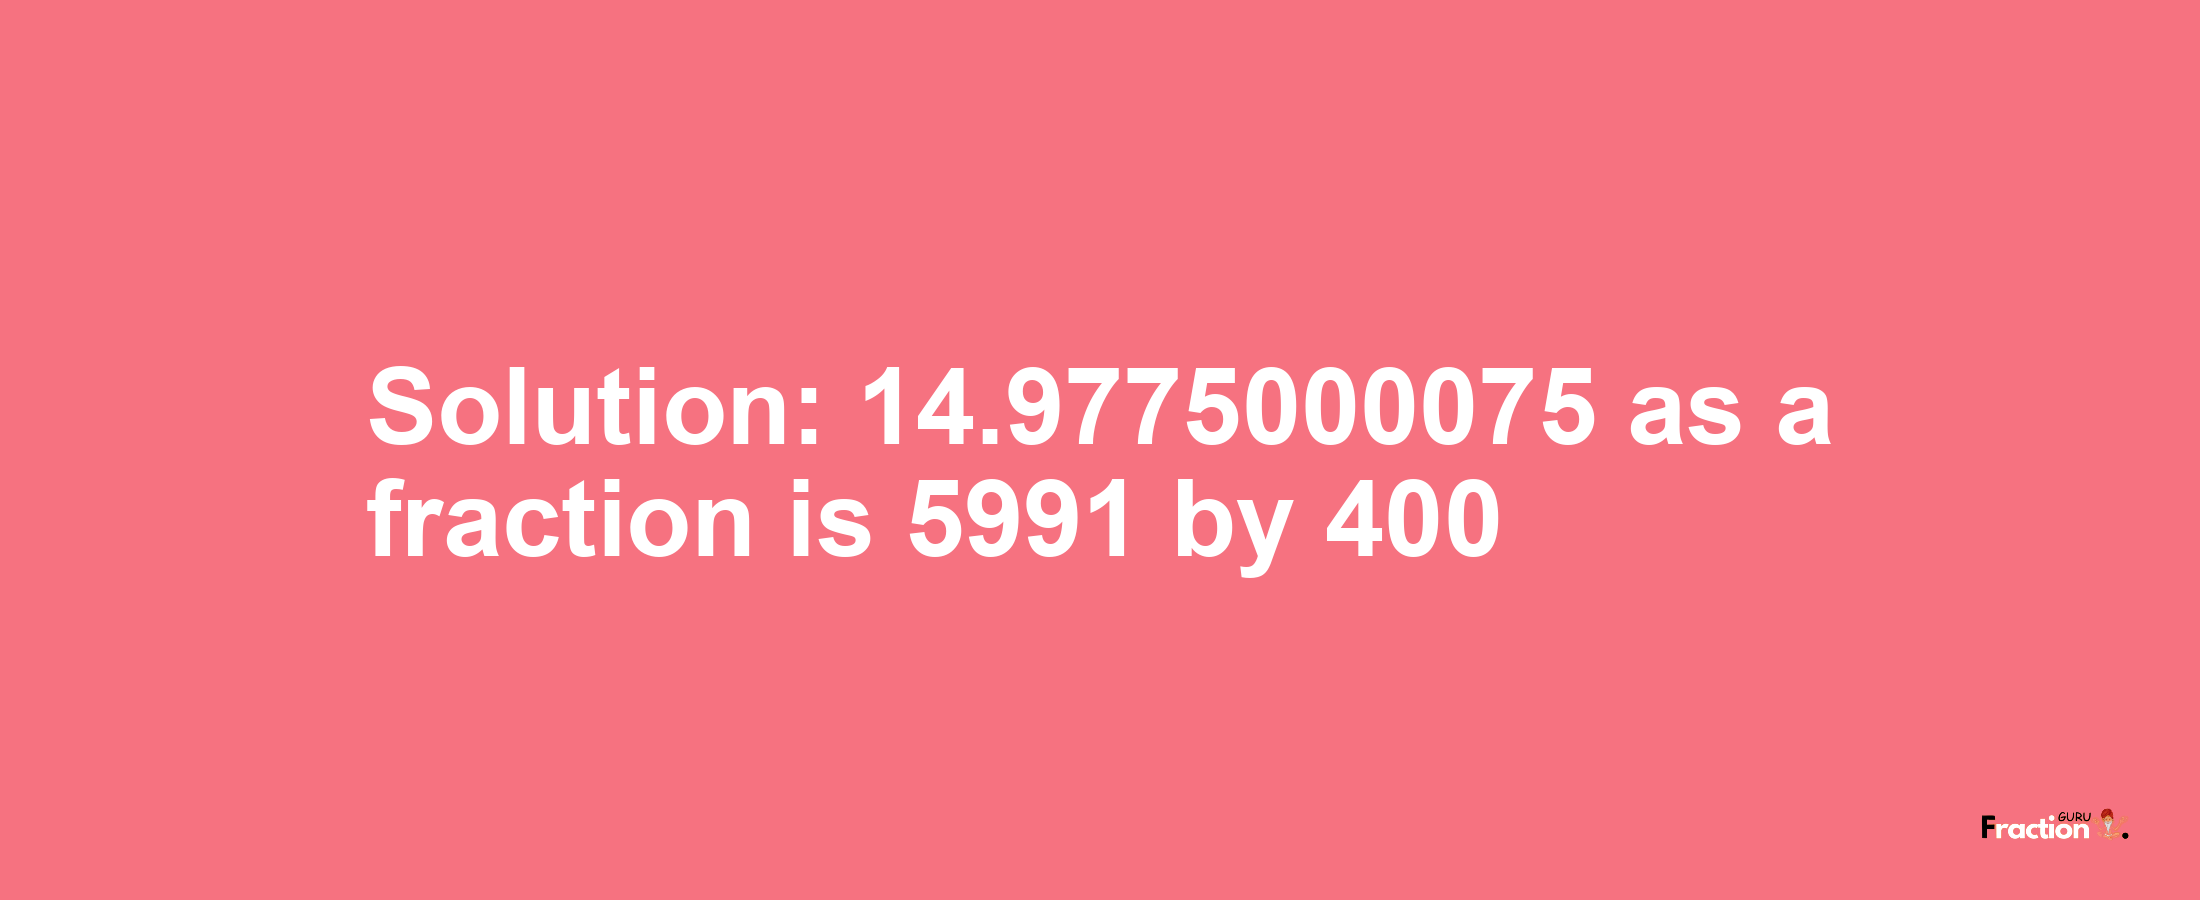 Solution:14.9775000075 as a fraction is 5991/400